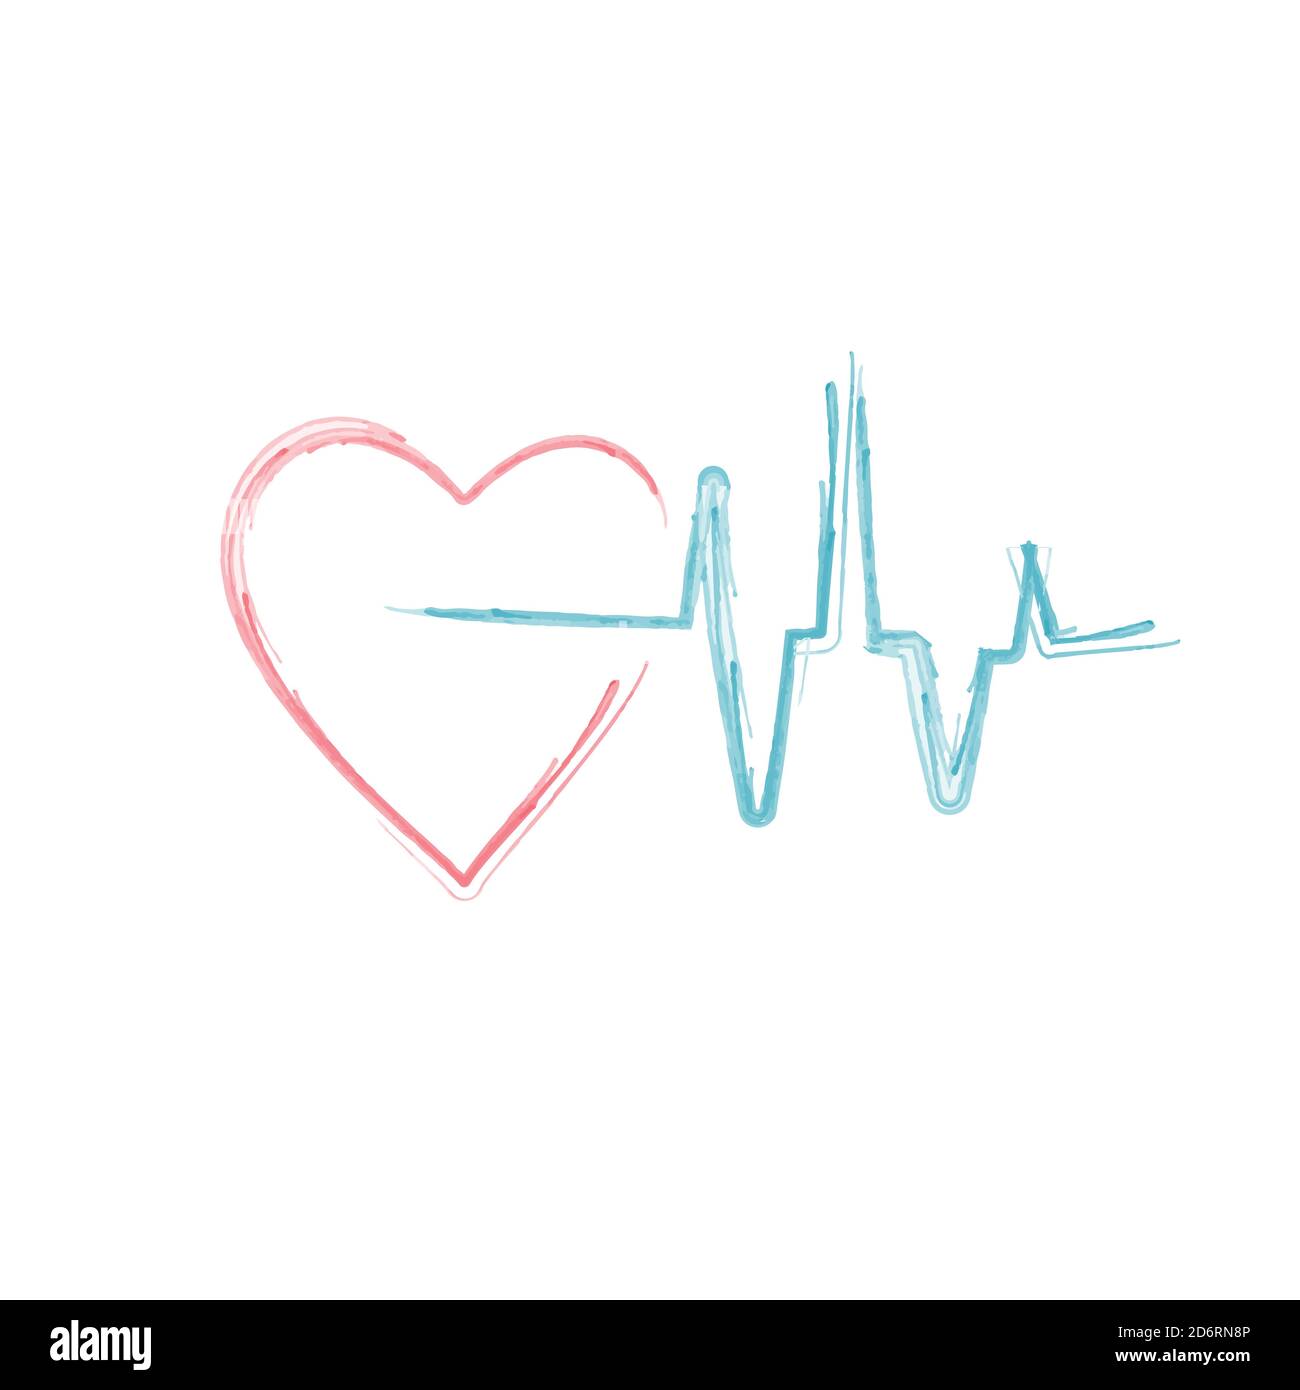 Hand drawn Red heart with ekg medical design. Stock vector illustration isolated on white background. Stock Vector